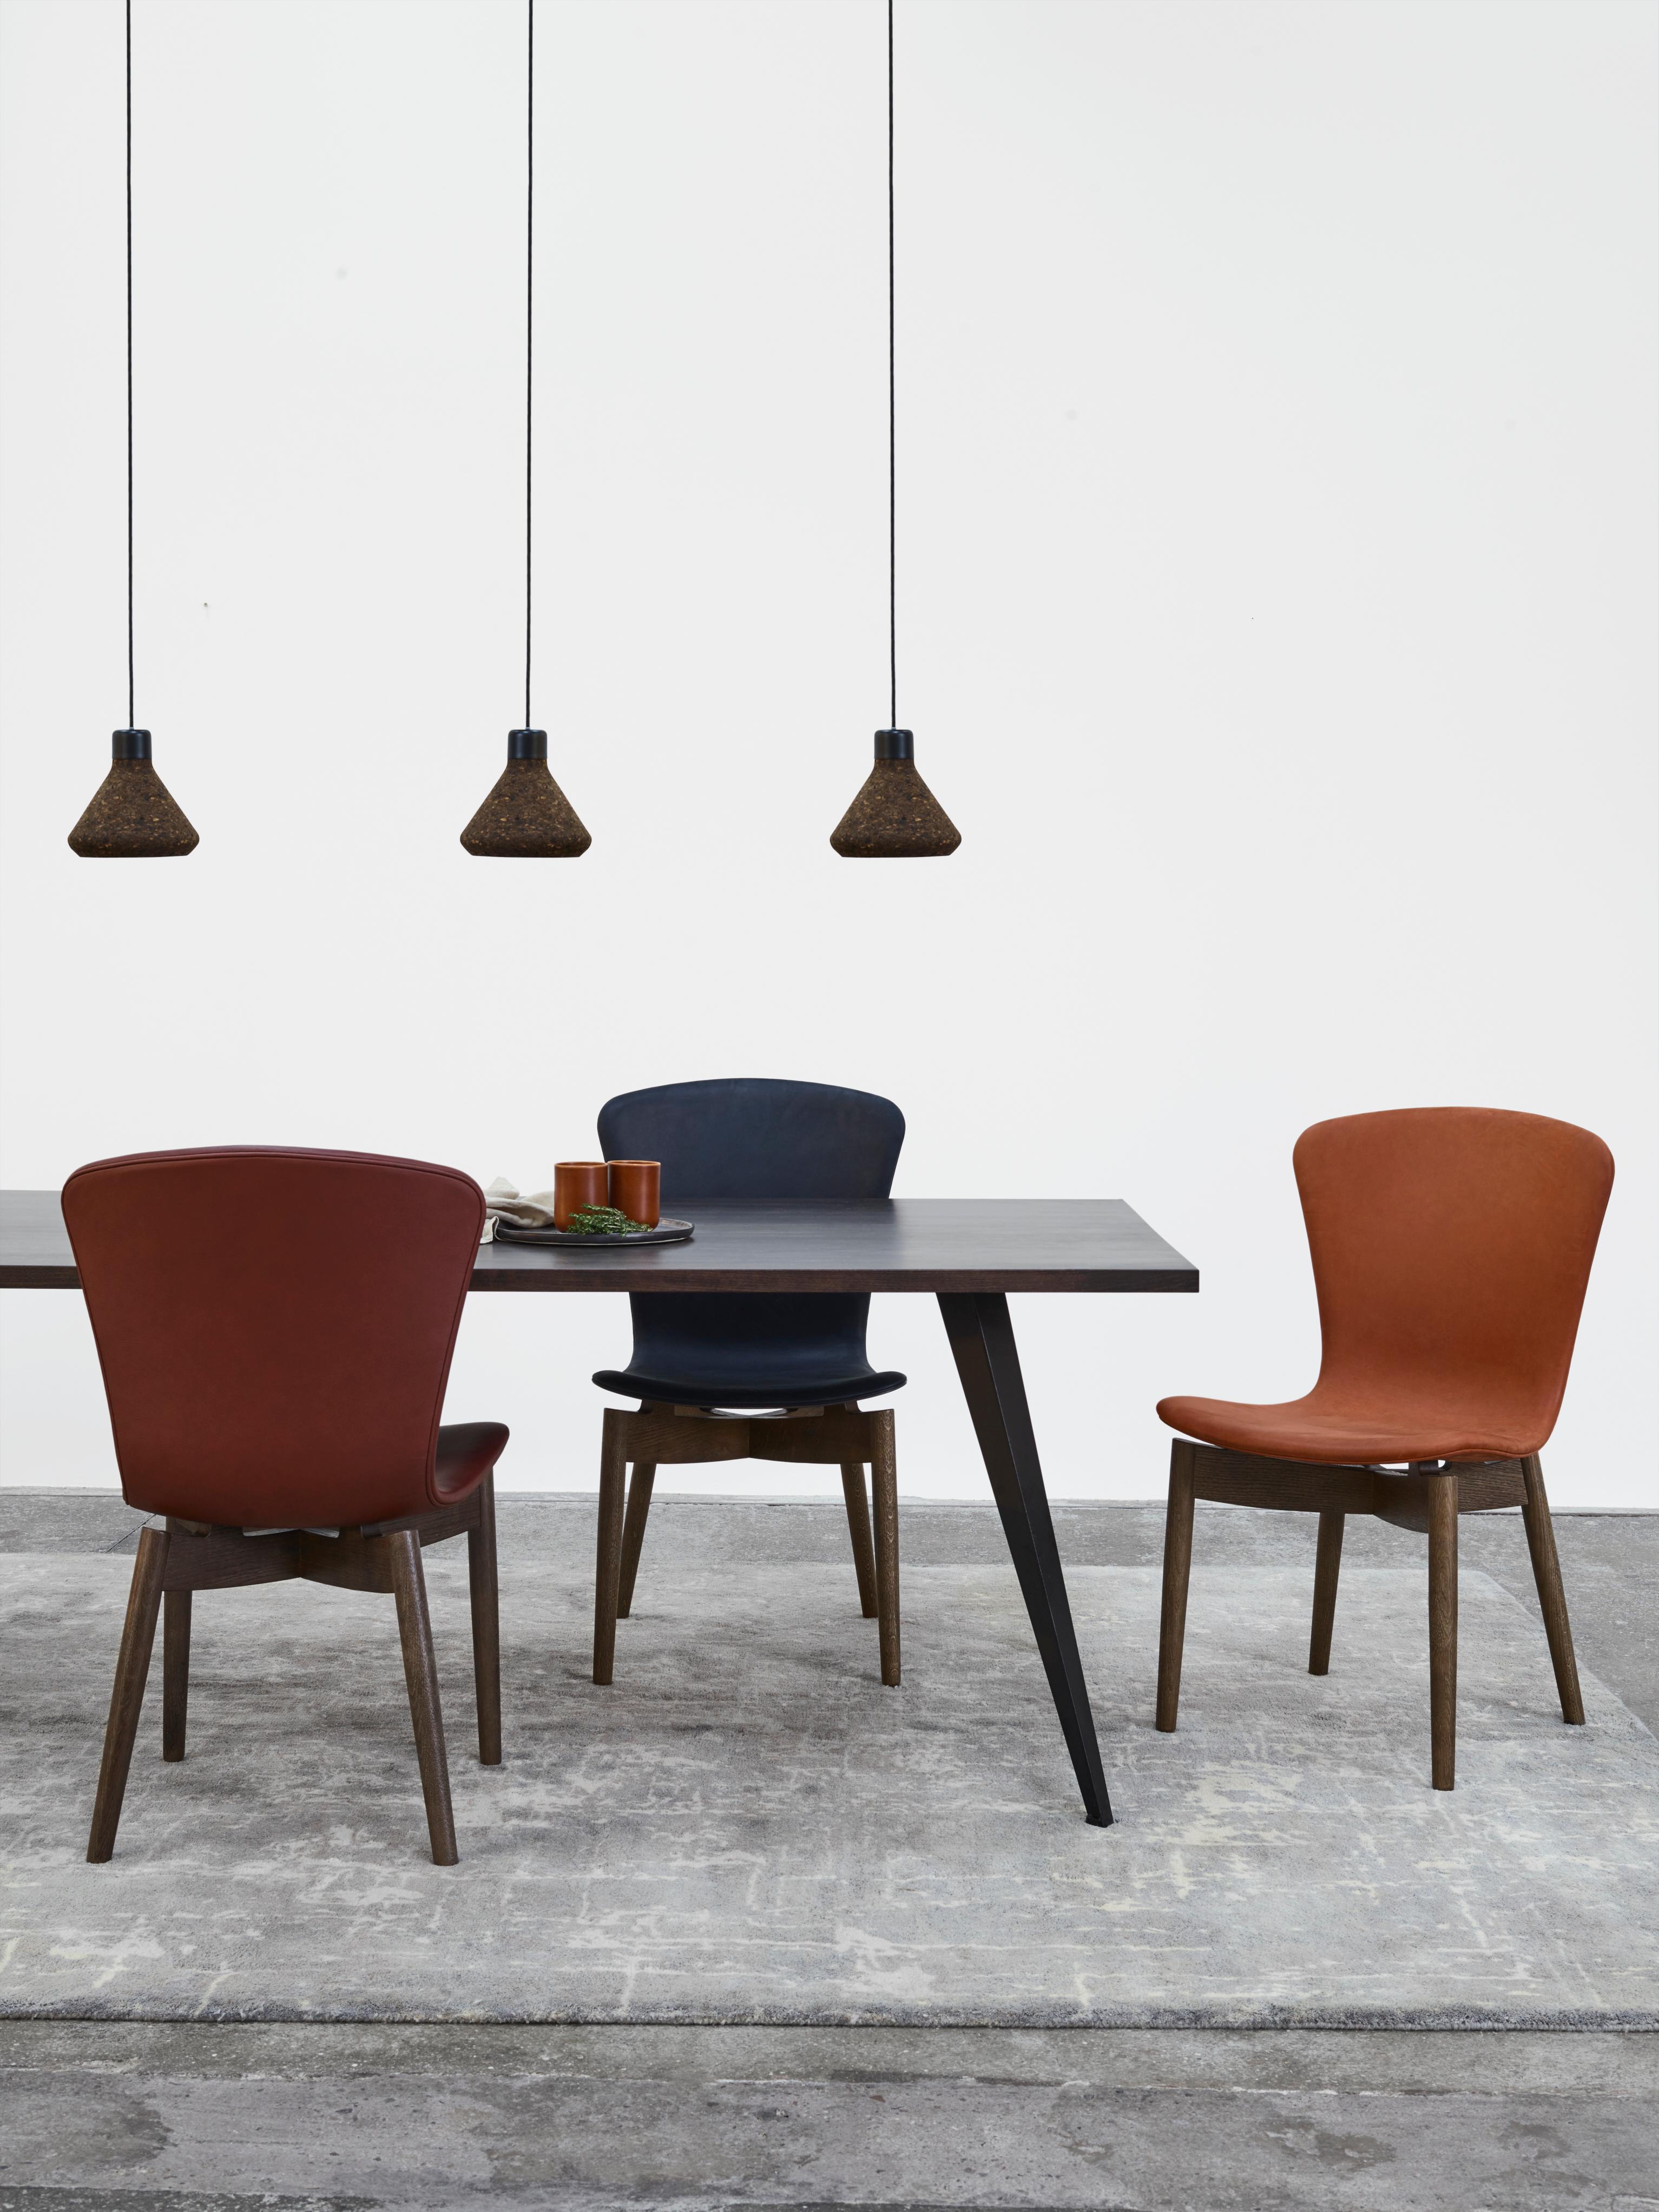 The Mater Shell Dining Chair is now introduced with a new and softer leather upholstery version of the Mater Shell Chair designed by Michael Dreeben. The collaboration with the most recognised Danish leather supplier, Sorensen Leathers, is bringing